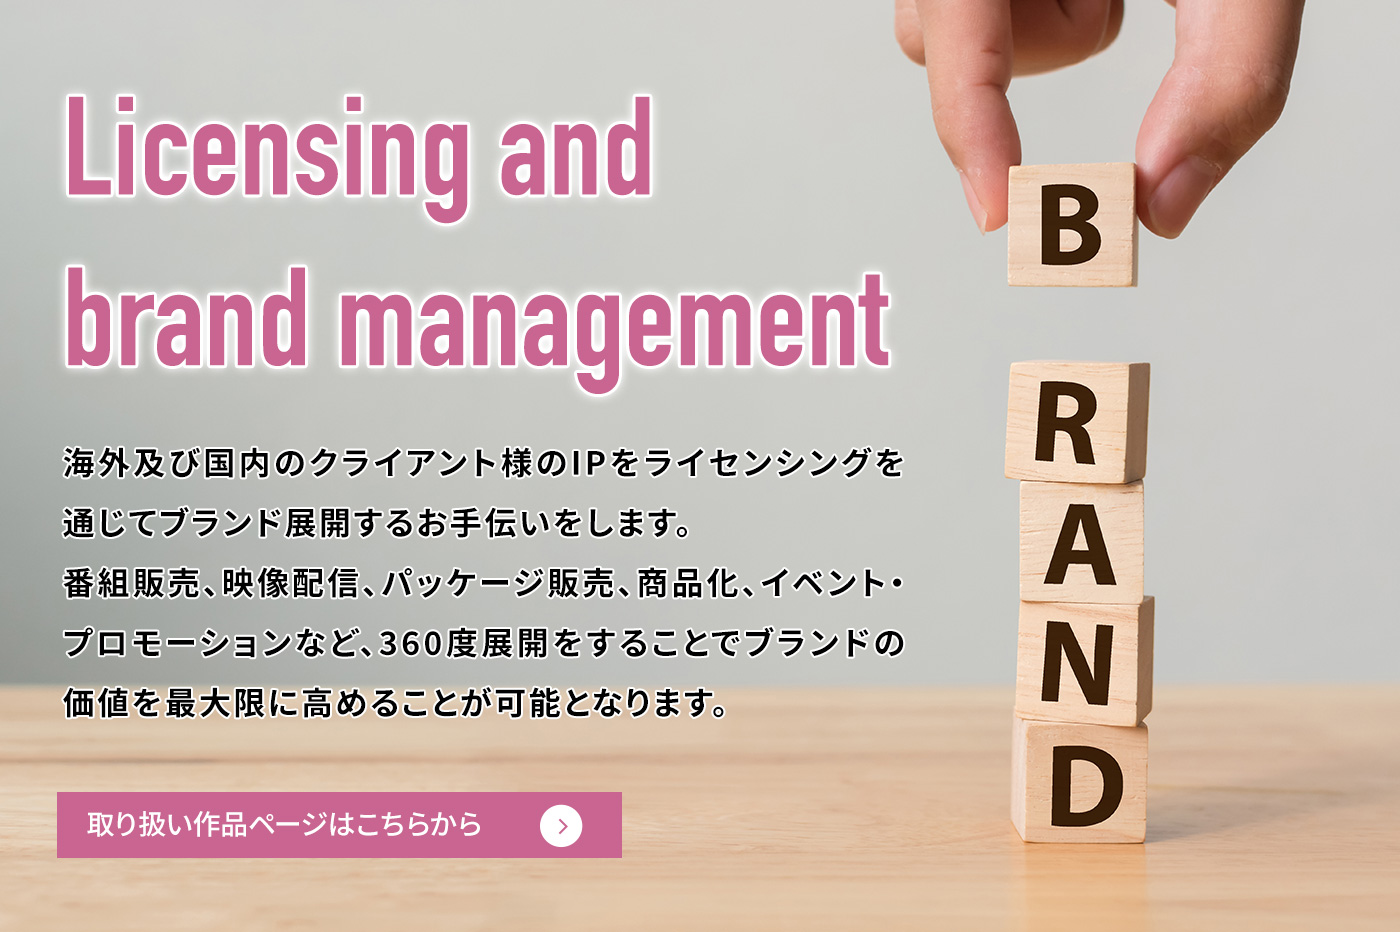 Licensing and brand management